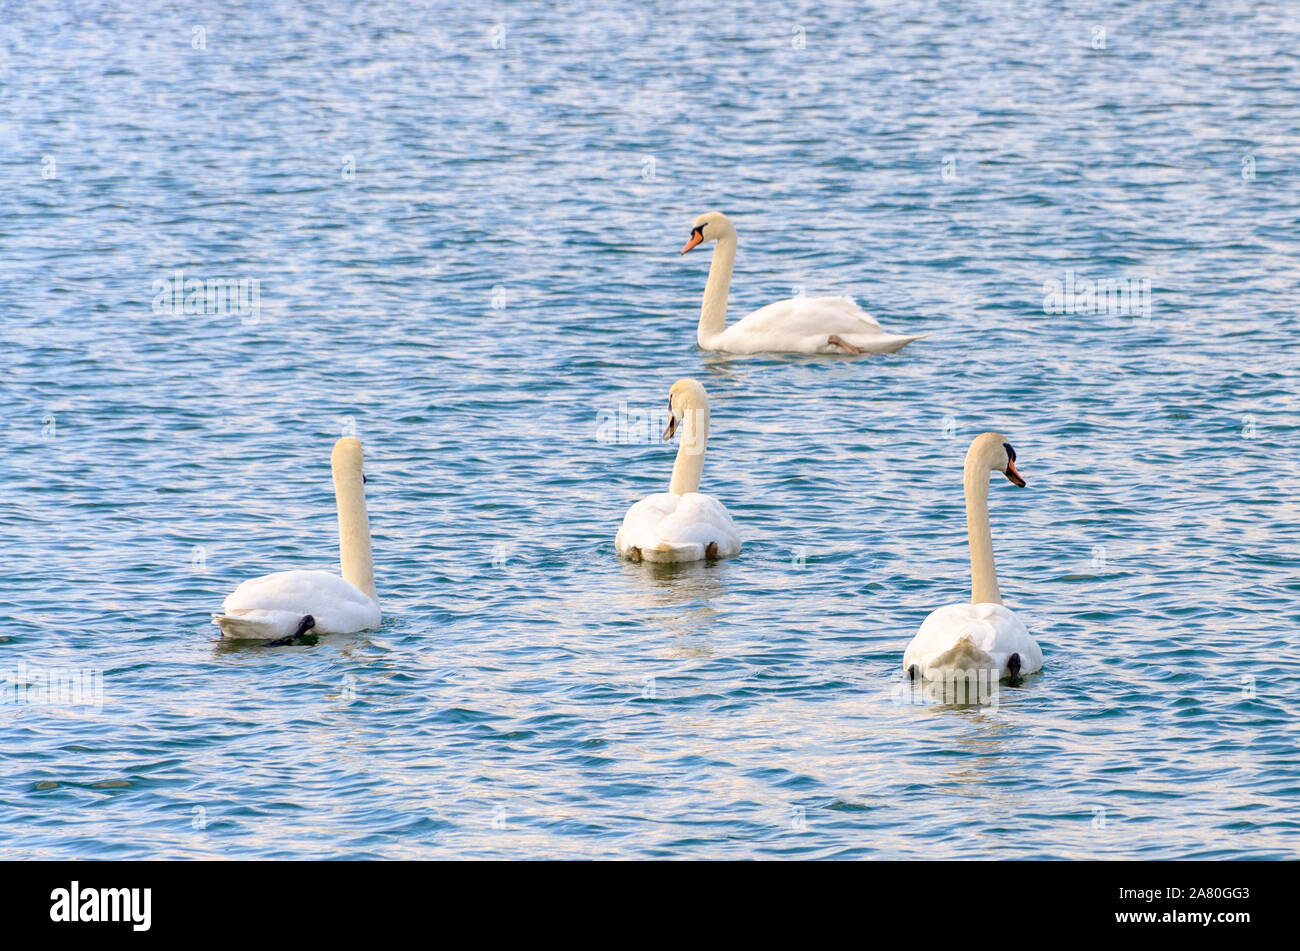 Four white mute swans swimming together away from the camera on rippling water Stock Photo